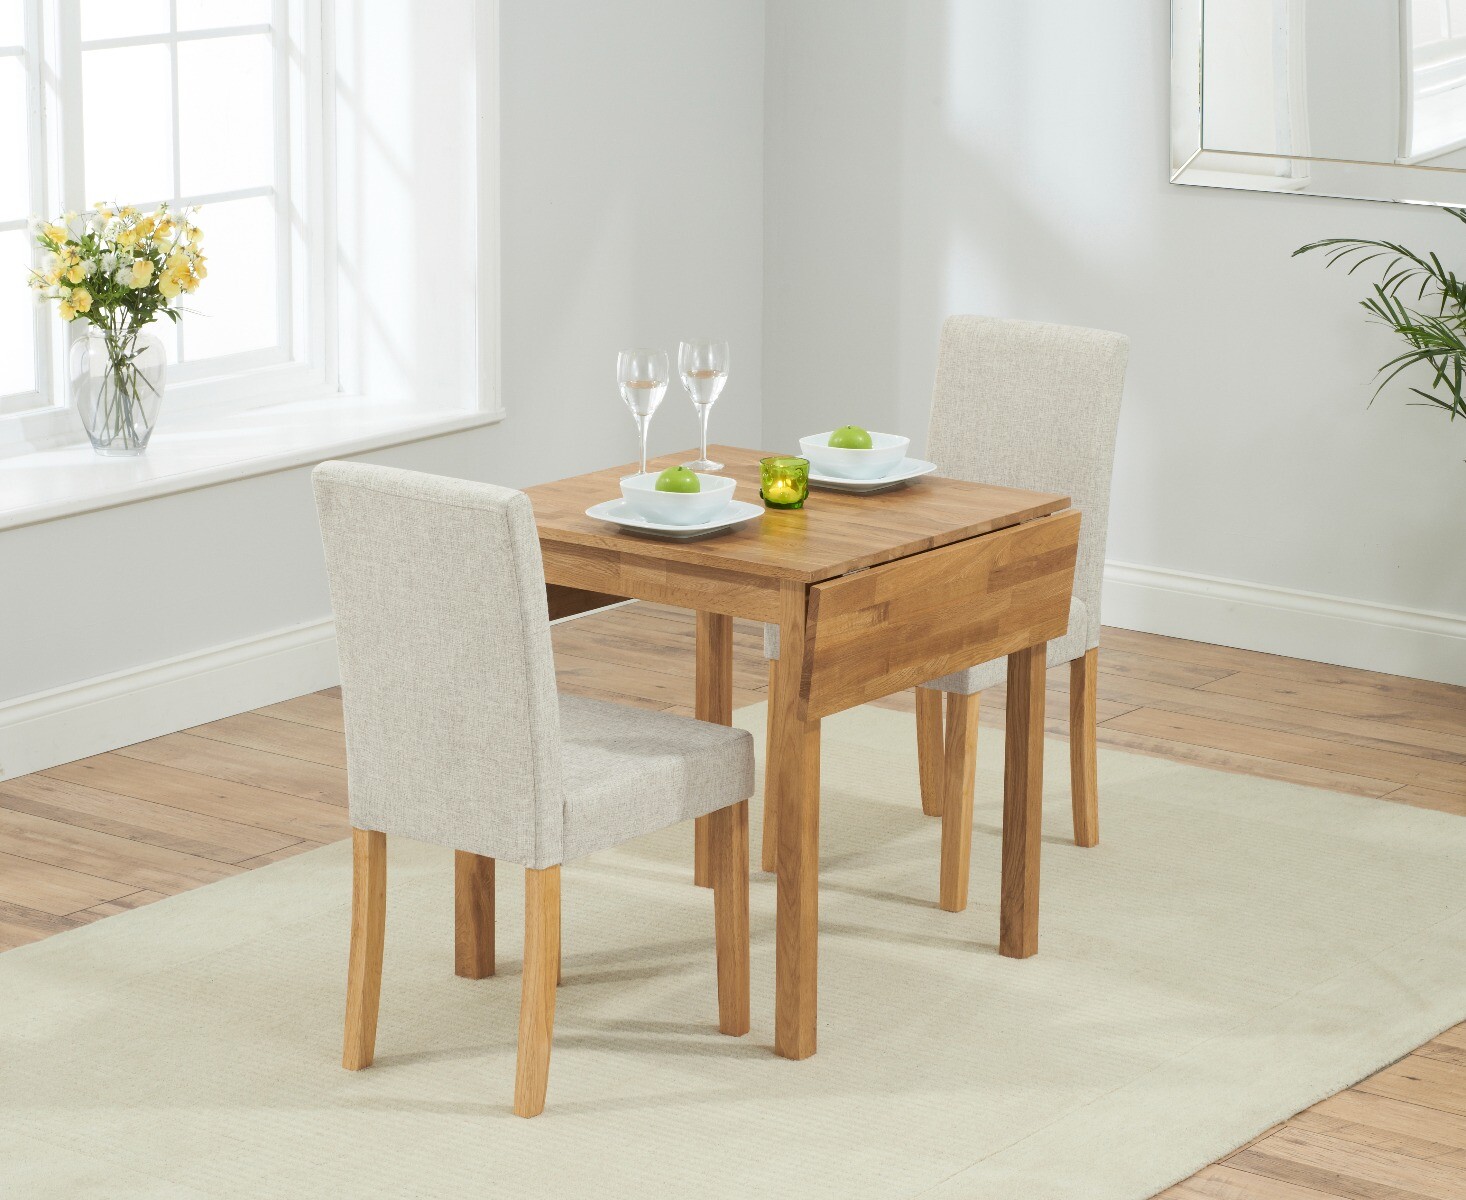 Extending York 70cm Solid Oak Dining Table With 2 Charcoal Grey Lila Fabric Chairs